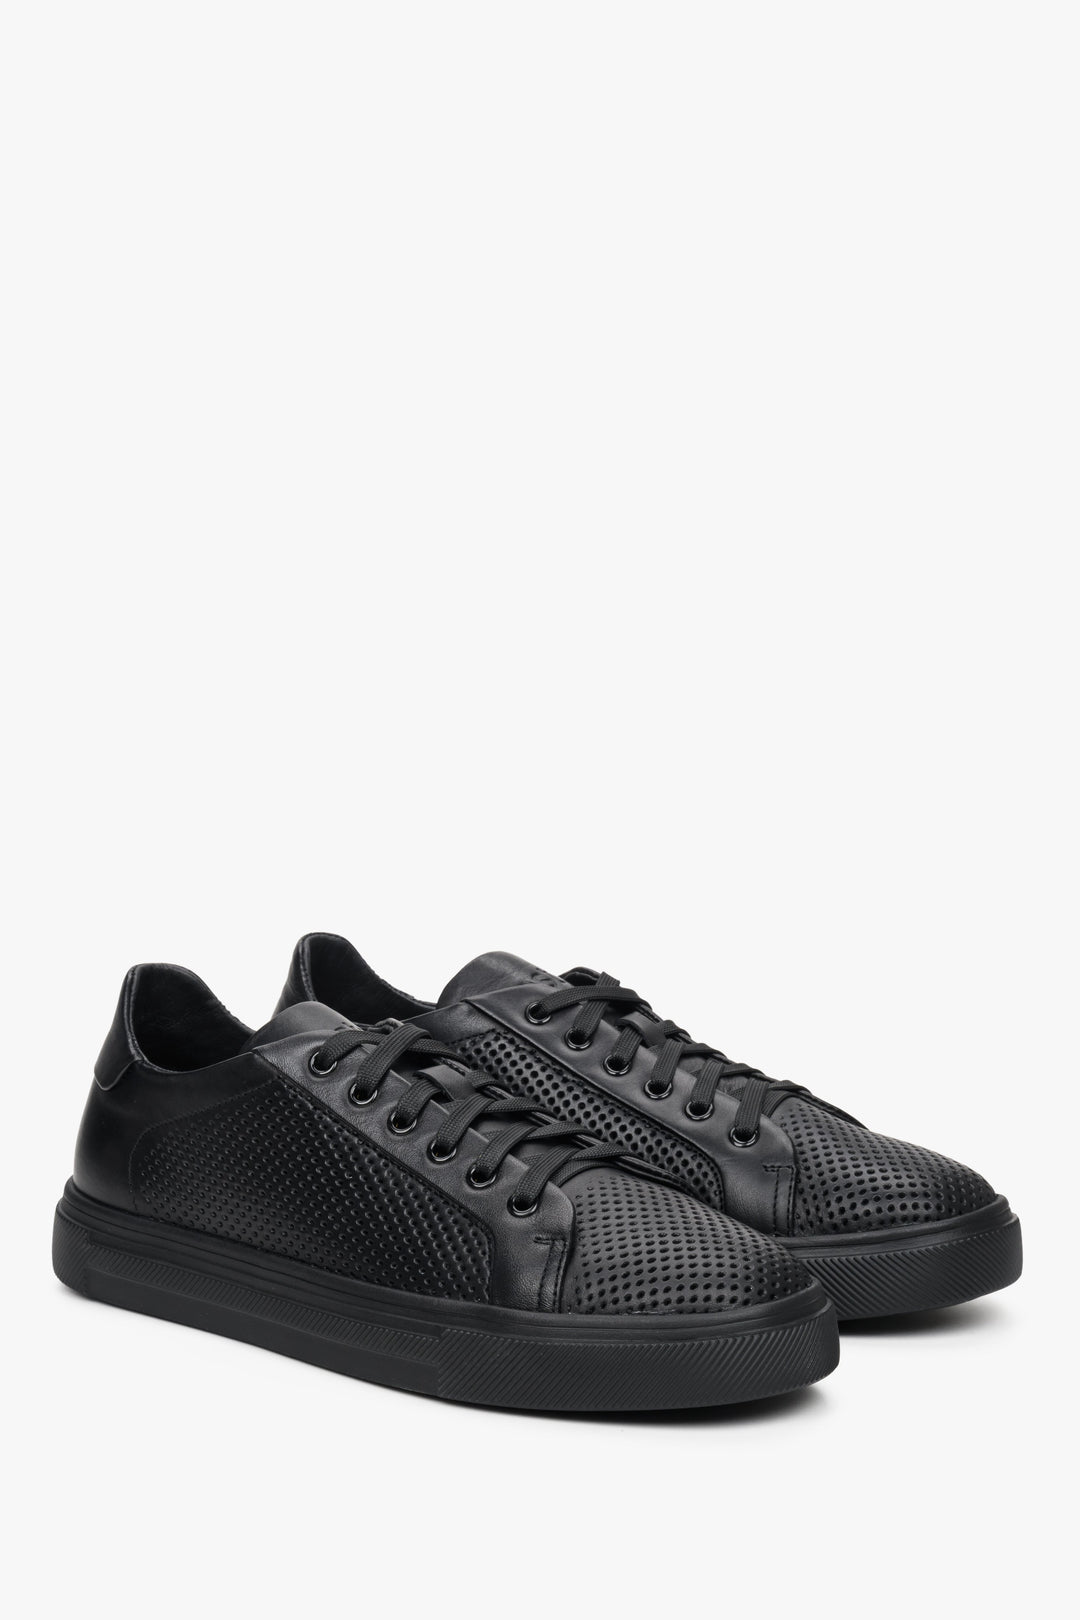 Men's black sneakers with perforations and laces - Estro brand mode.